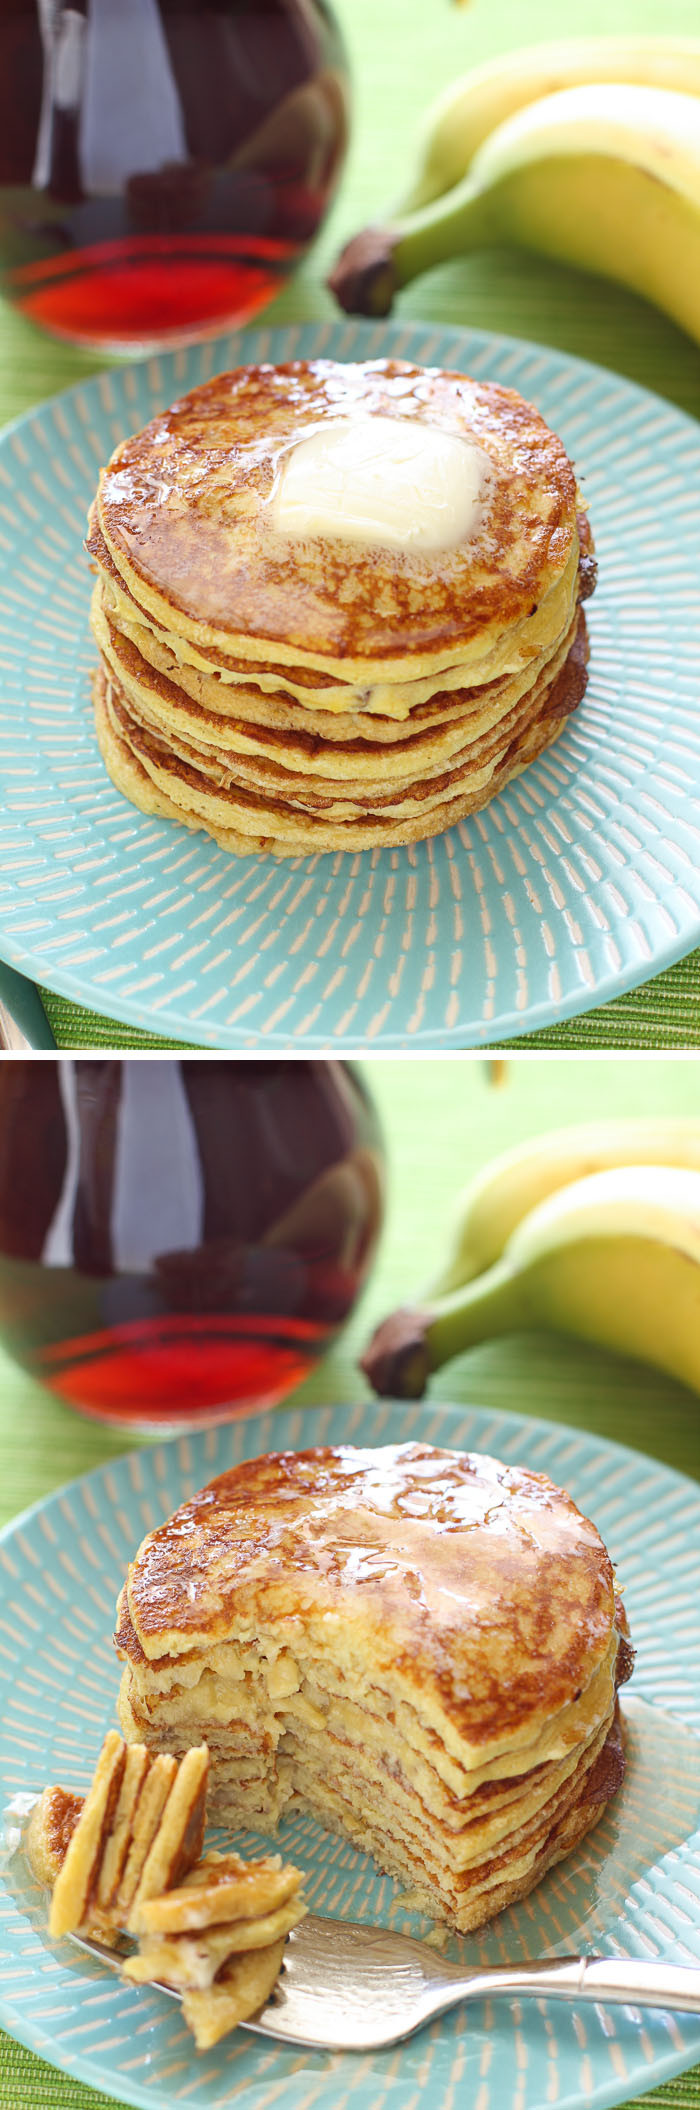 Healthy Banana Pancakes
 Four Ingre nt Protein Pancakes and 16 other simple